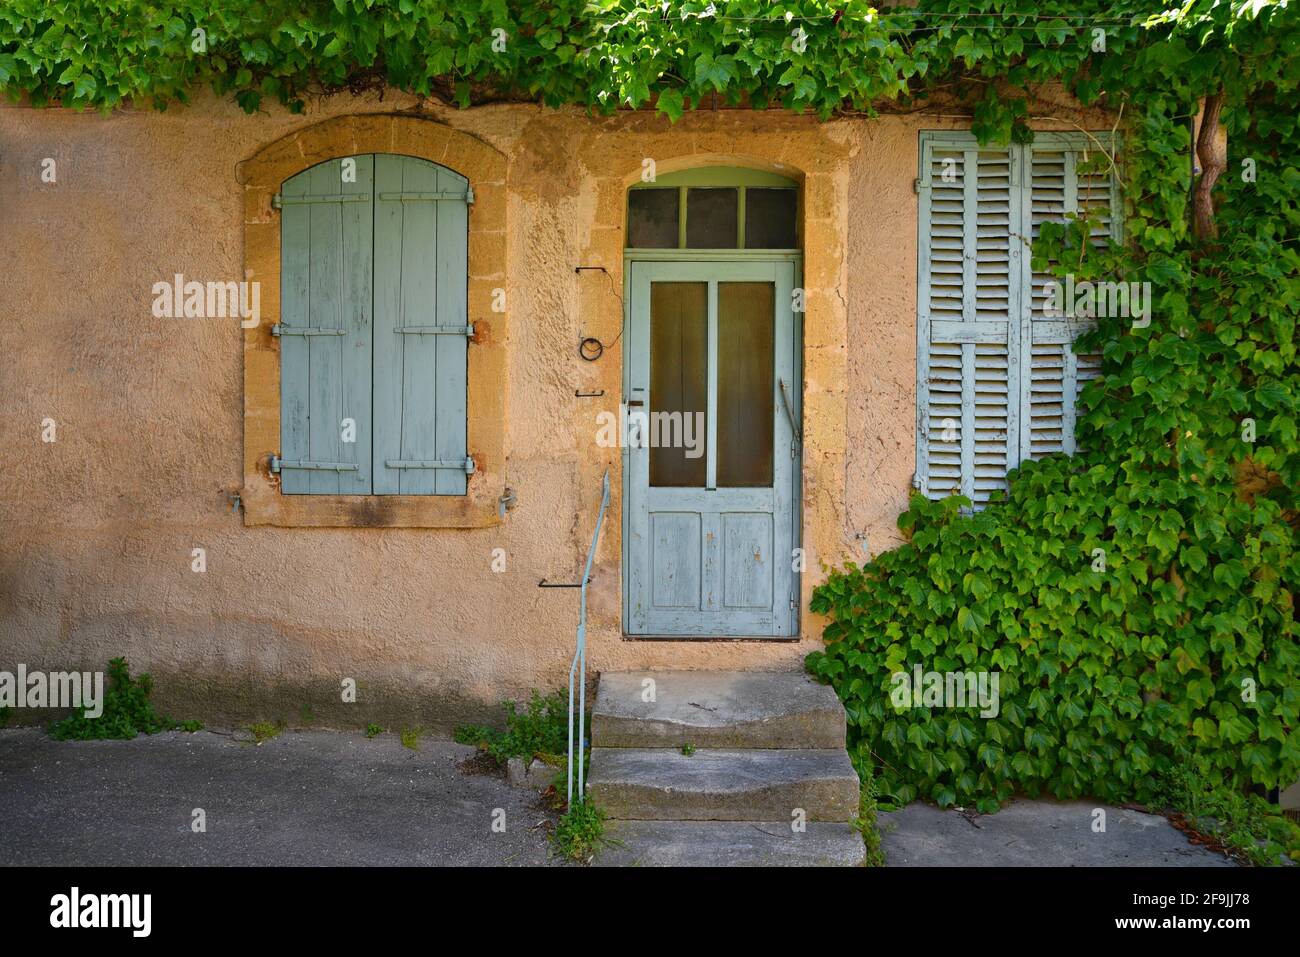 Typical Provençal style rural house facade with Vermont green door and shutters in the picturesque village of Lourmarin in Vaucluse, Provence France. Stock Photo